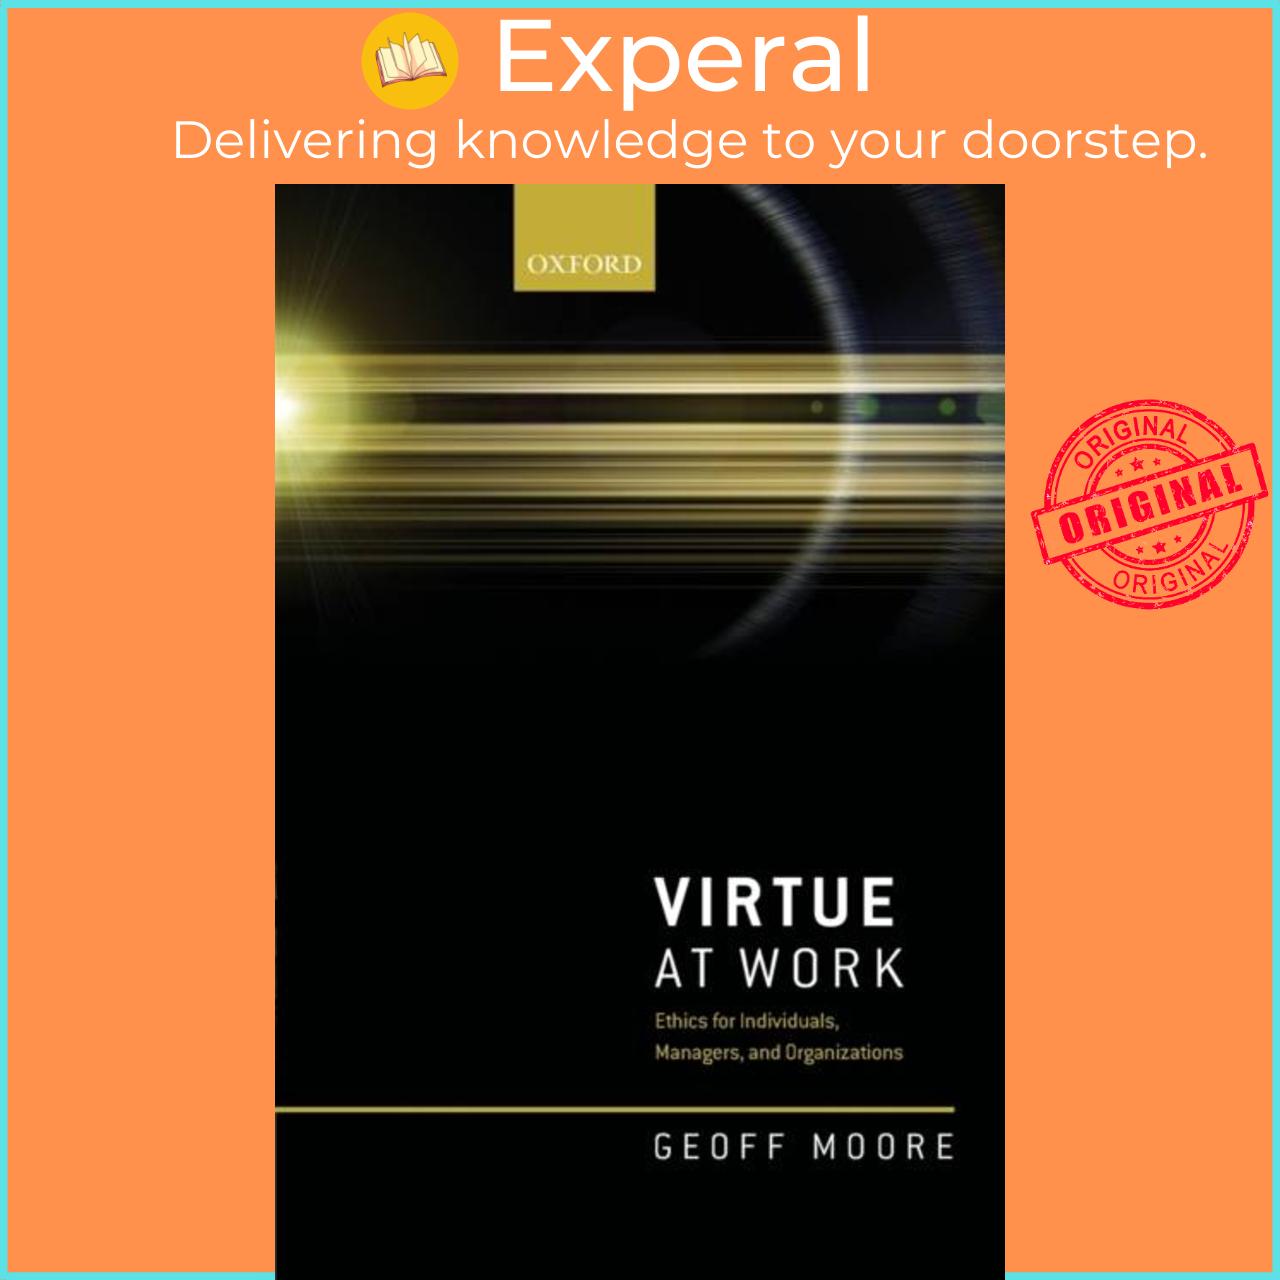 Sách - Virtue at Work - Ethics for Individuals, Managers, and Organizations by Geoff Moore (UK edition, paperback)